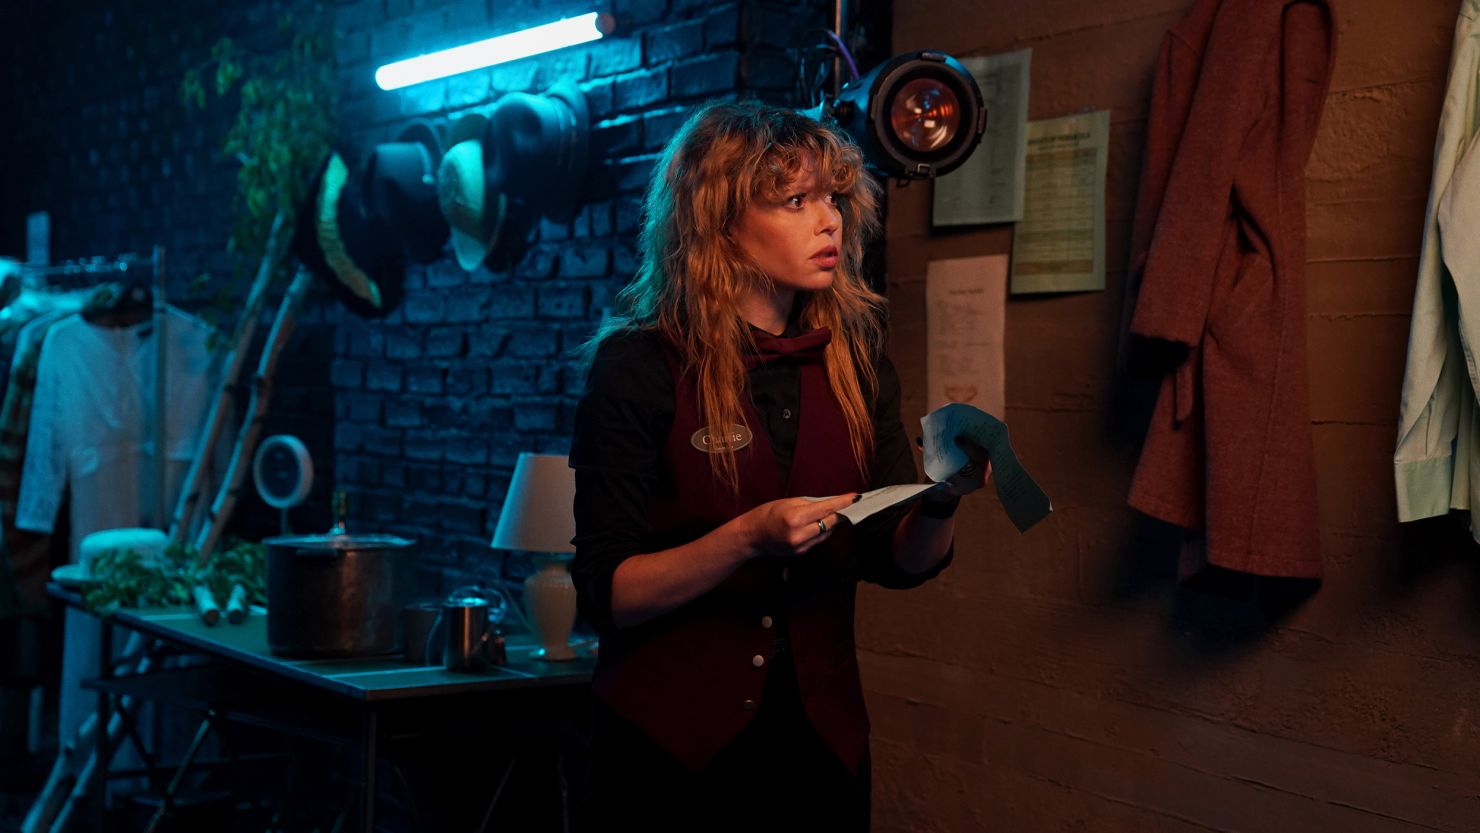 Natasha Lyonne in "Poker Face," an old-style detective show from producer Rian Johnson premiering on Peacock.